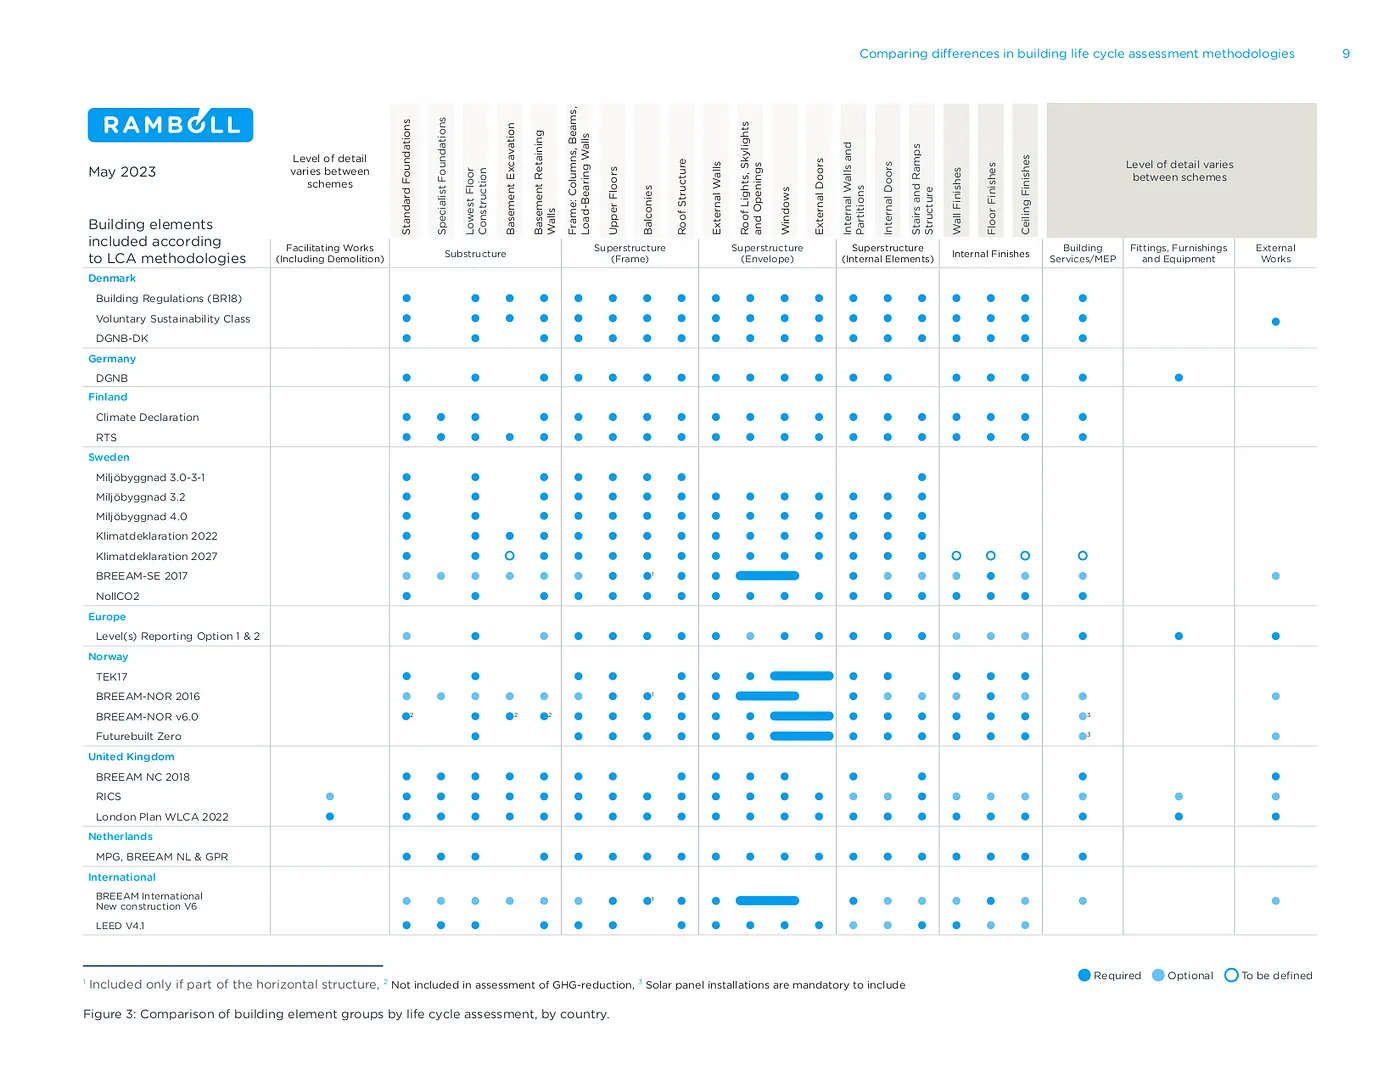 Ramboll LCA Building Element Groups Comparison by Country